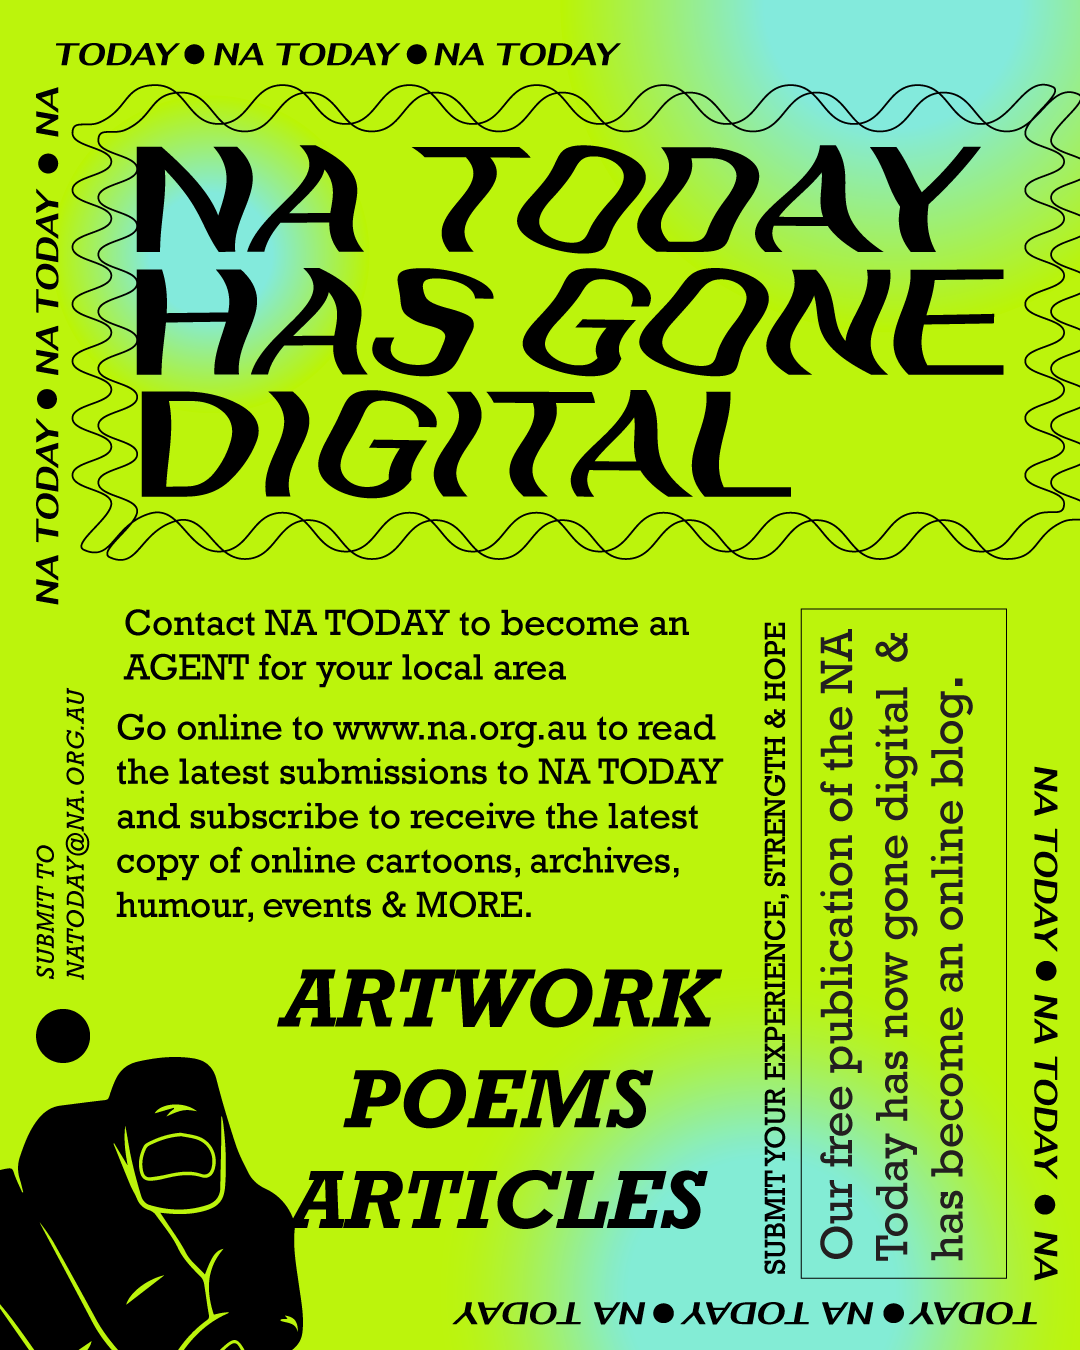 Image stating that the NA TODAY magazine has now gone digital and become an online blog